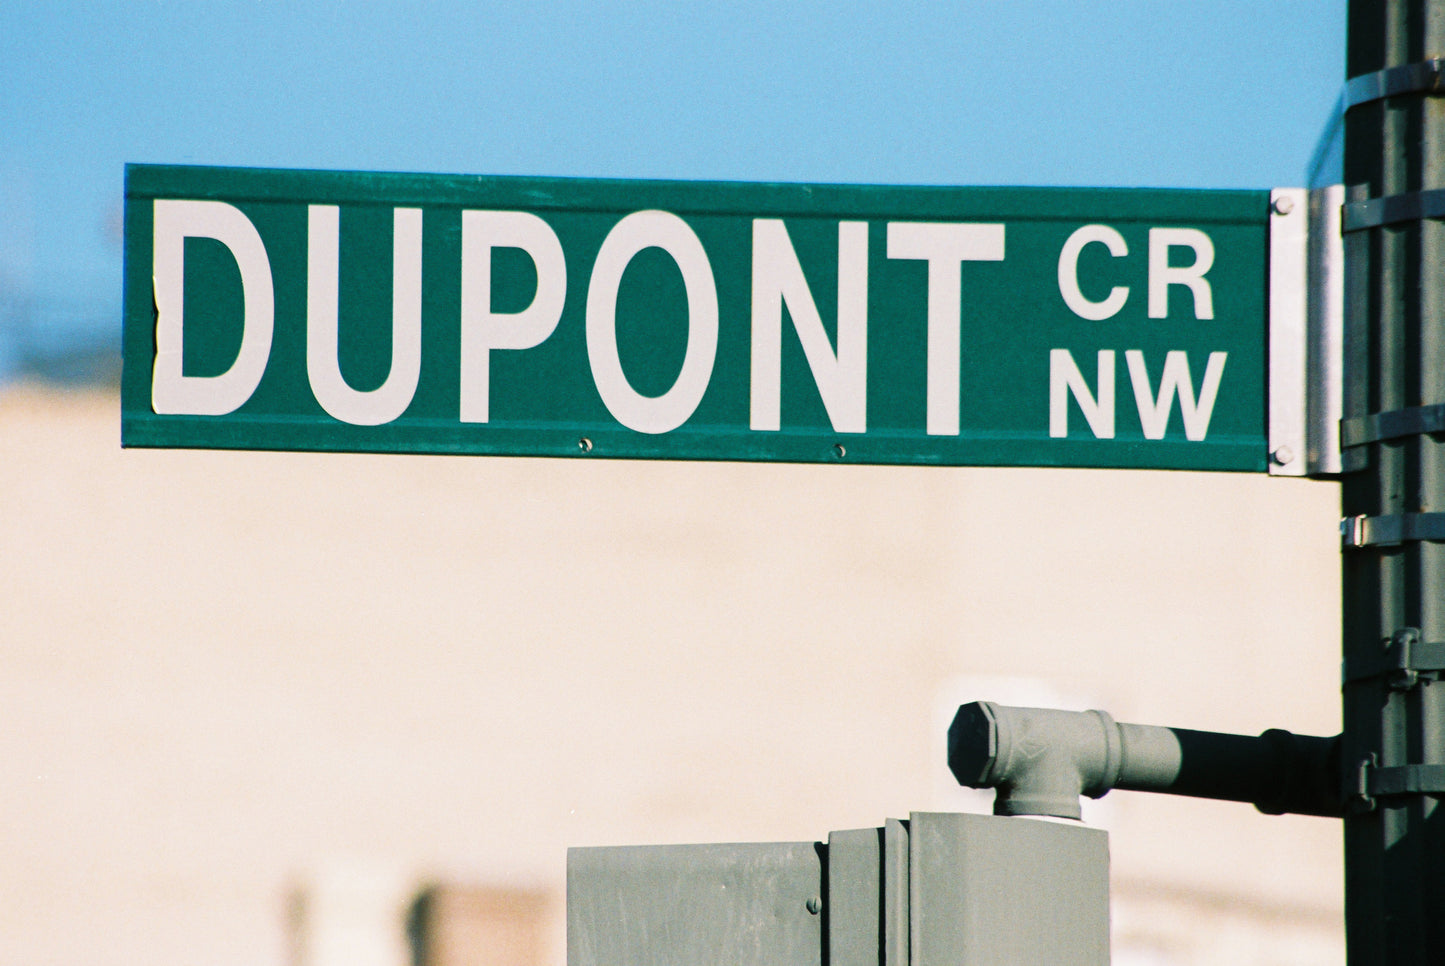 Dupont CR NW